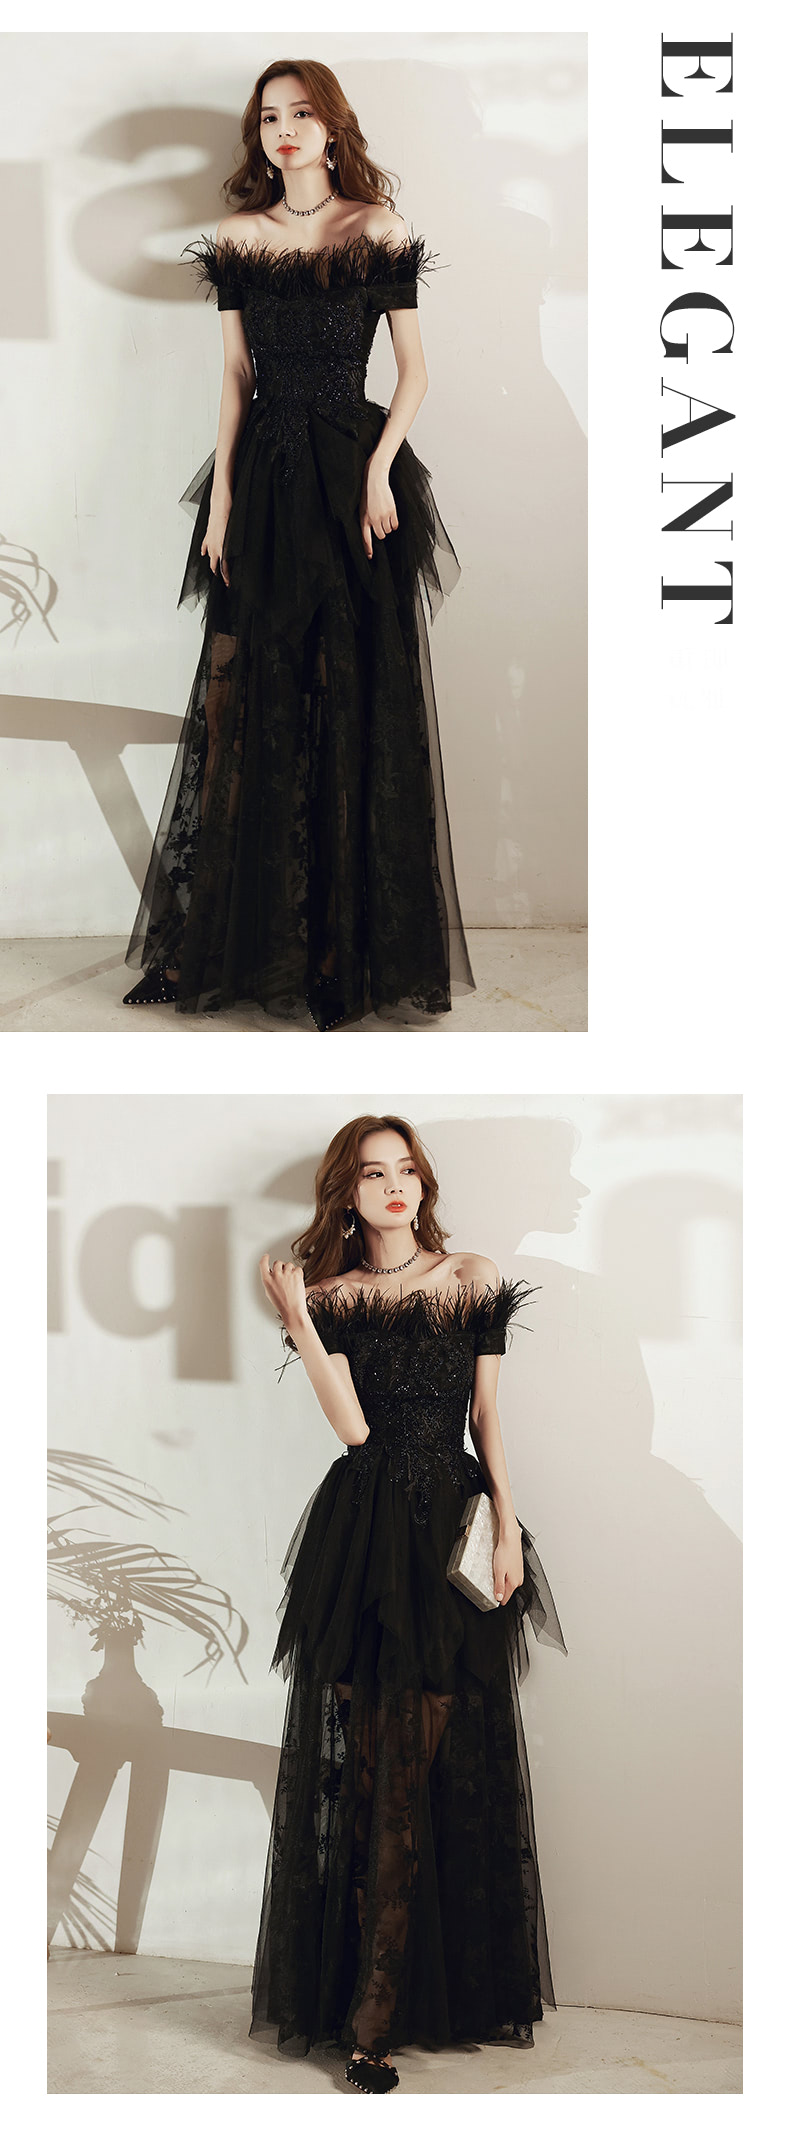 Luxury-Black-Feather-Cocktail-Prom-Dress-Evening-Party-Long-Gown13.jpg